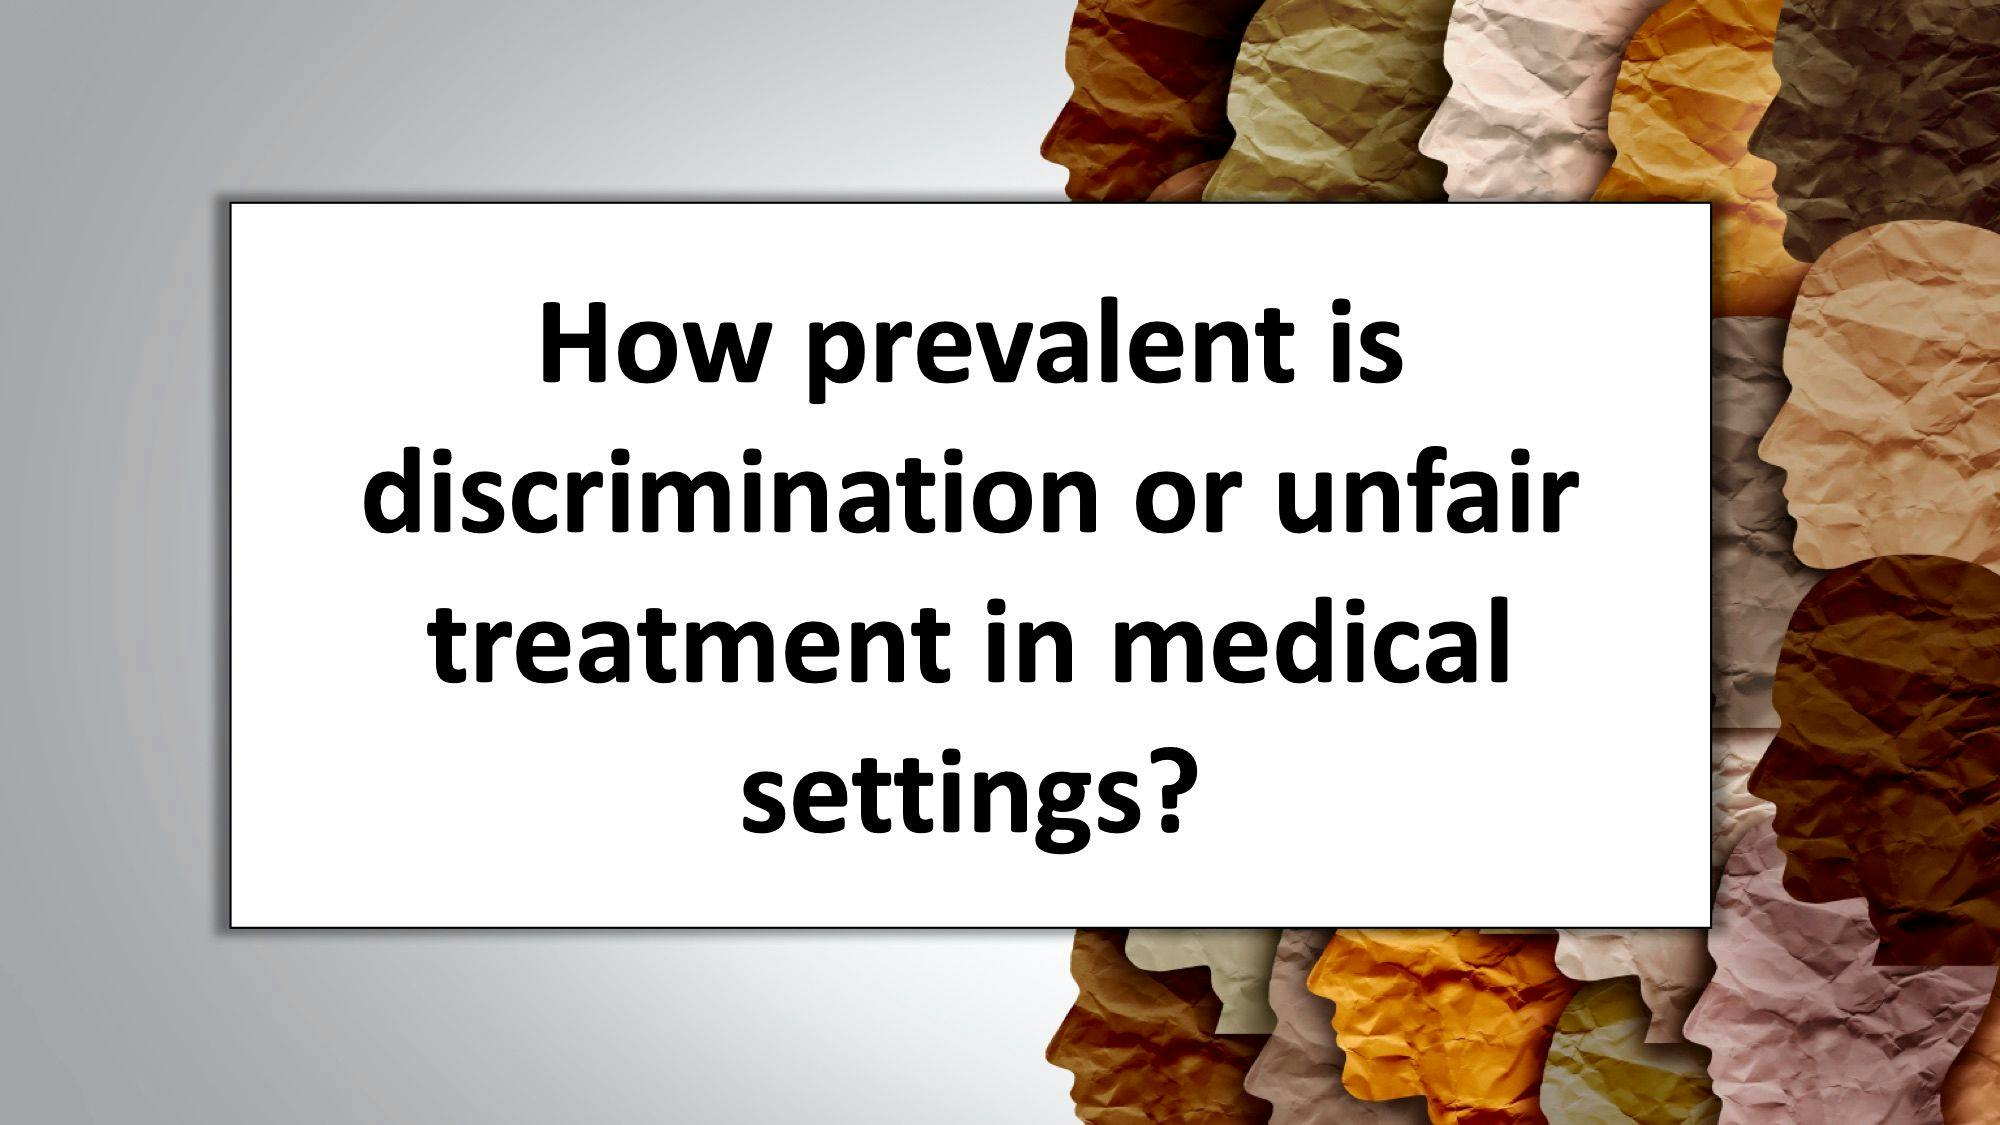 How prevalent is discrimination or unfair treatment in medical settings? 